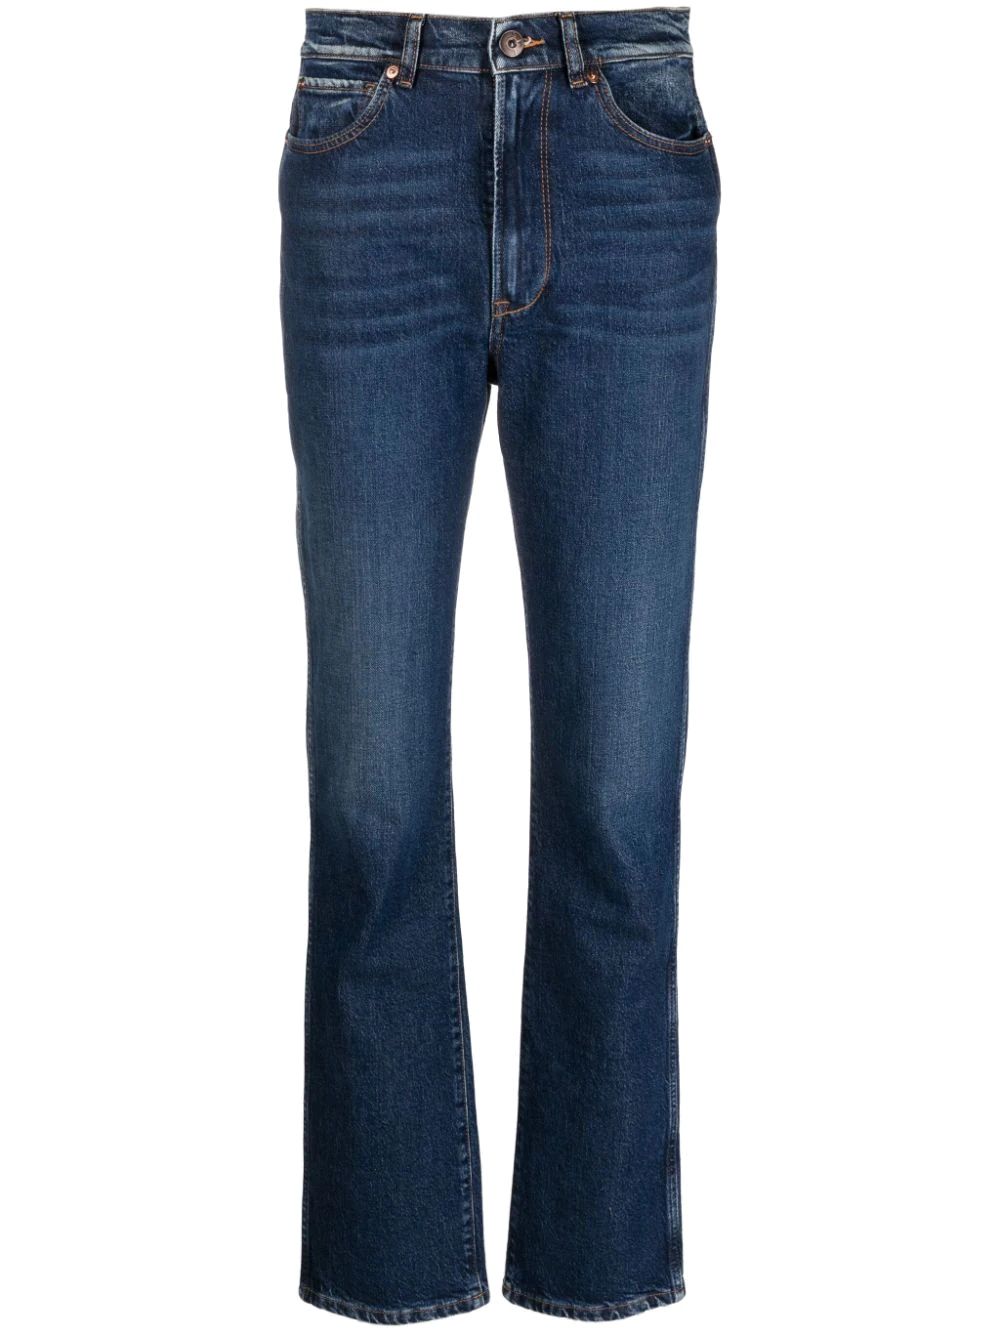 Slim fit jeans in cotton blend